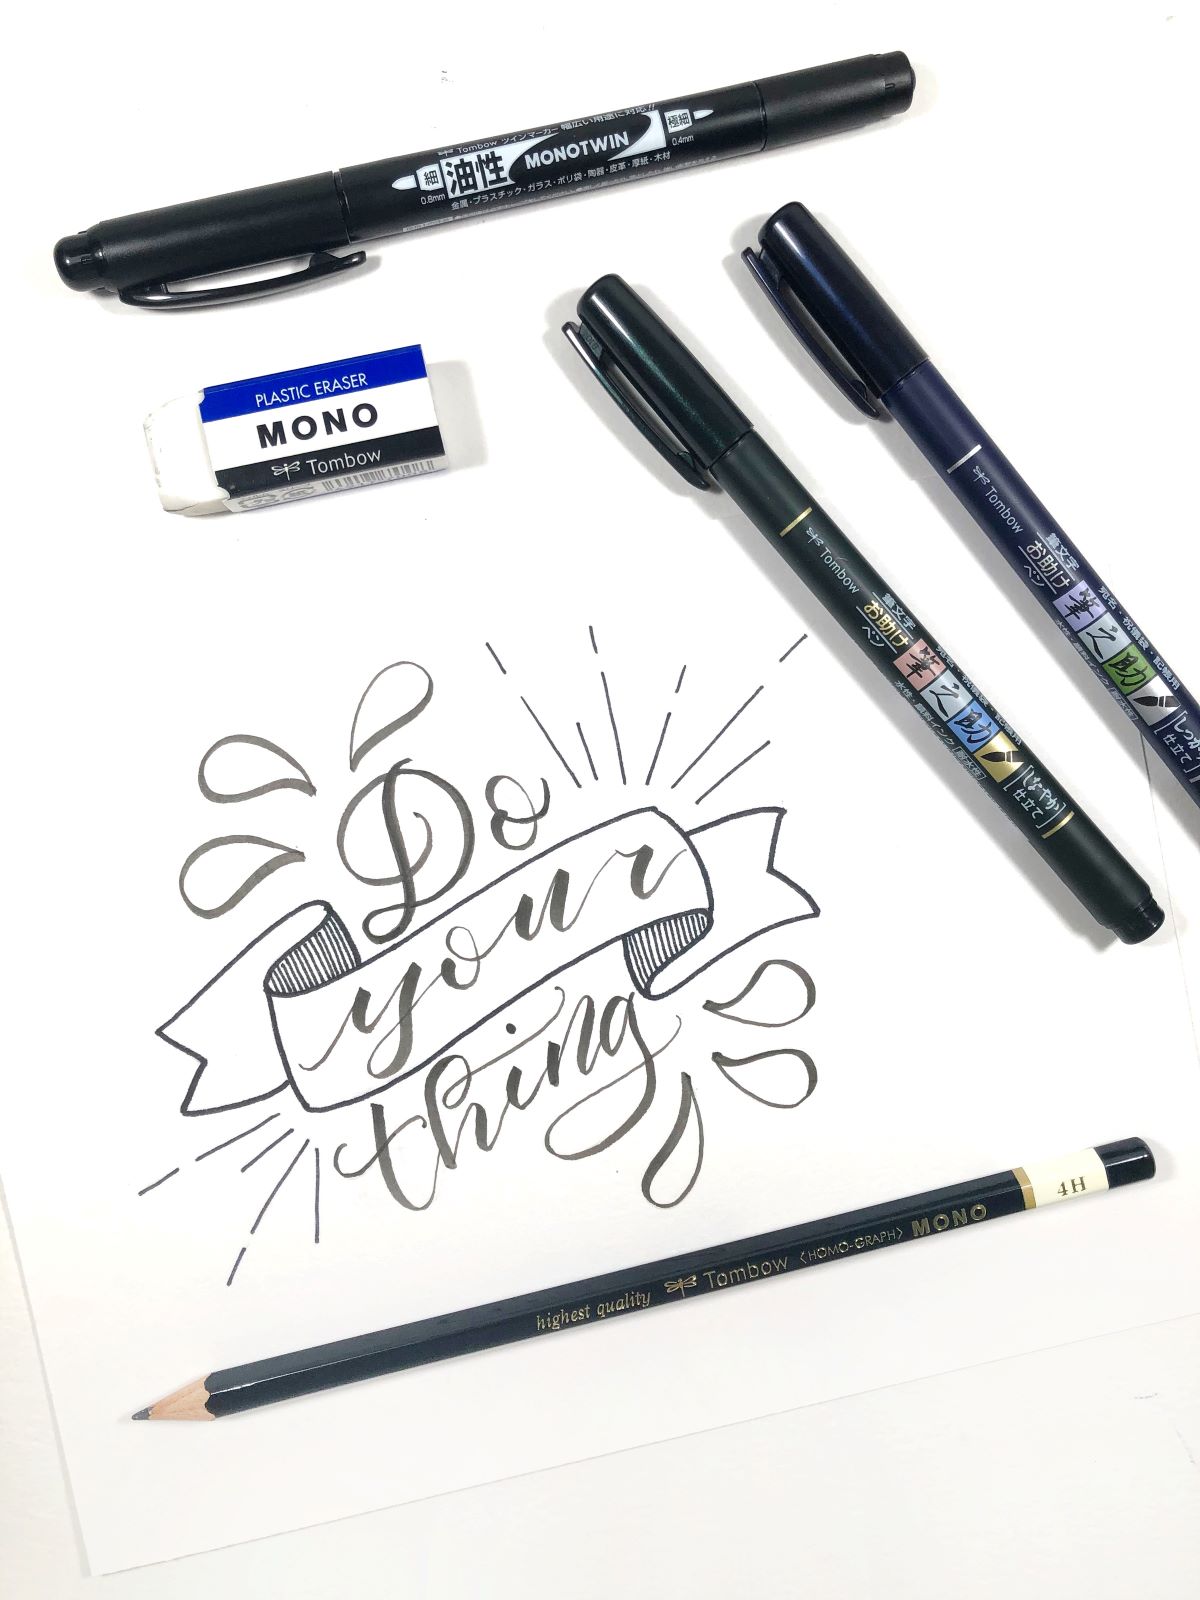 Use Tombow's Advanced Lettering Set Like A Pro! Create with @aheartenedcalling #tombow #lettering